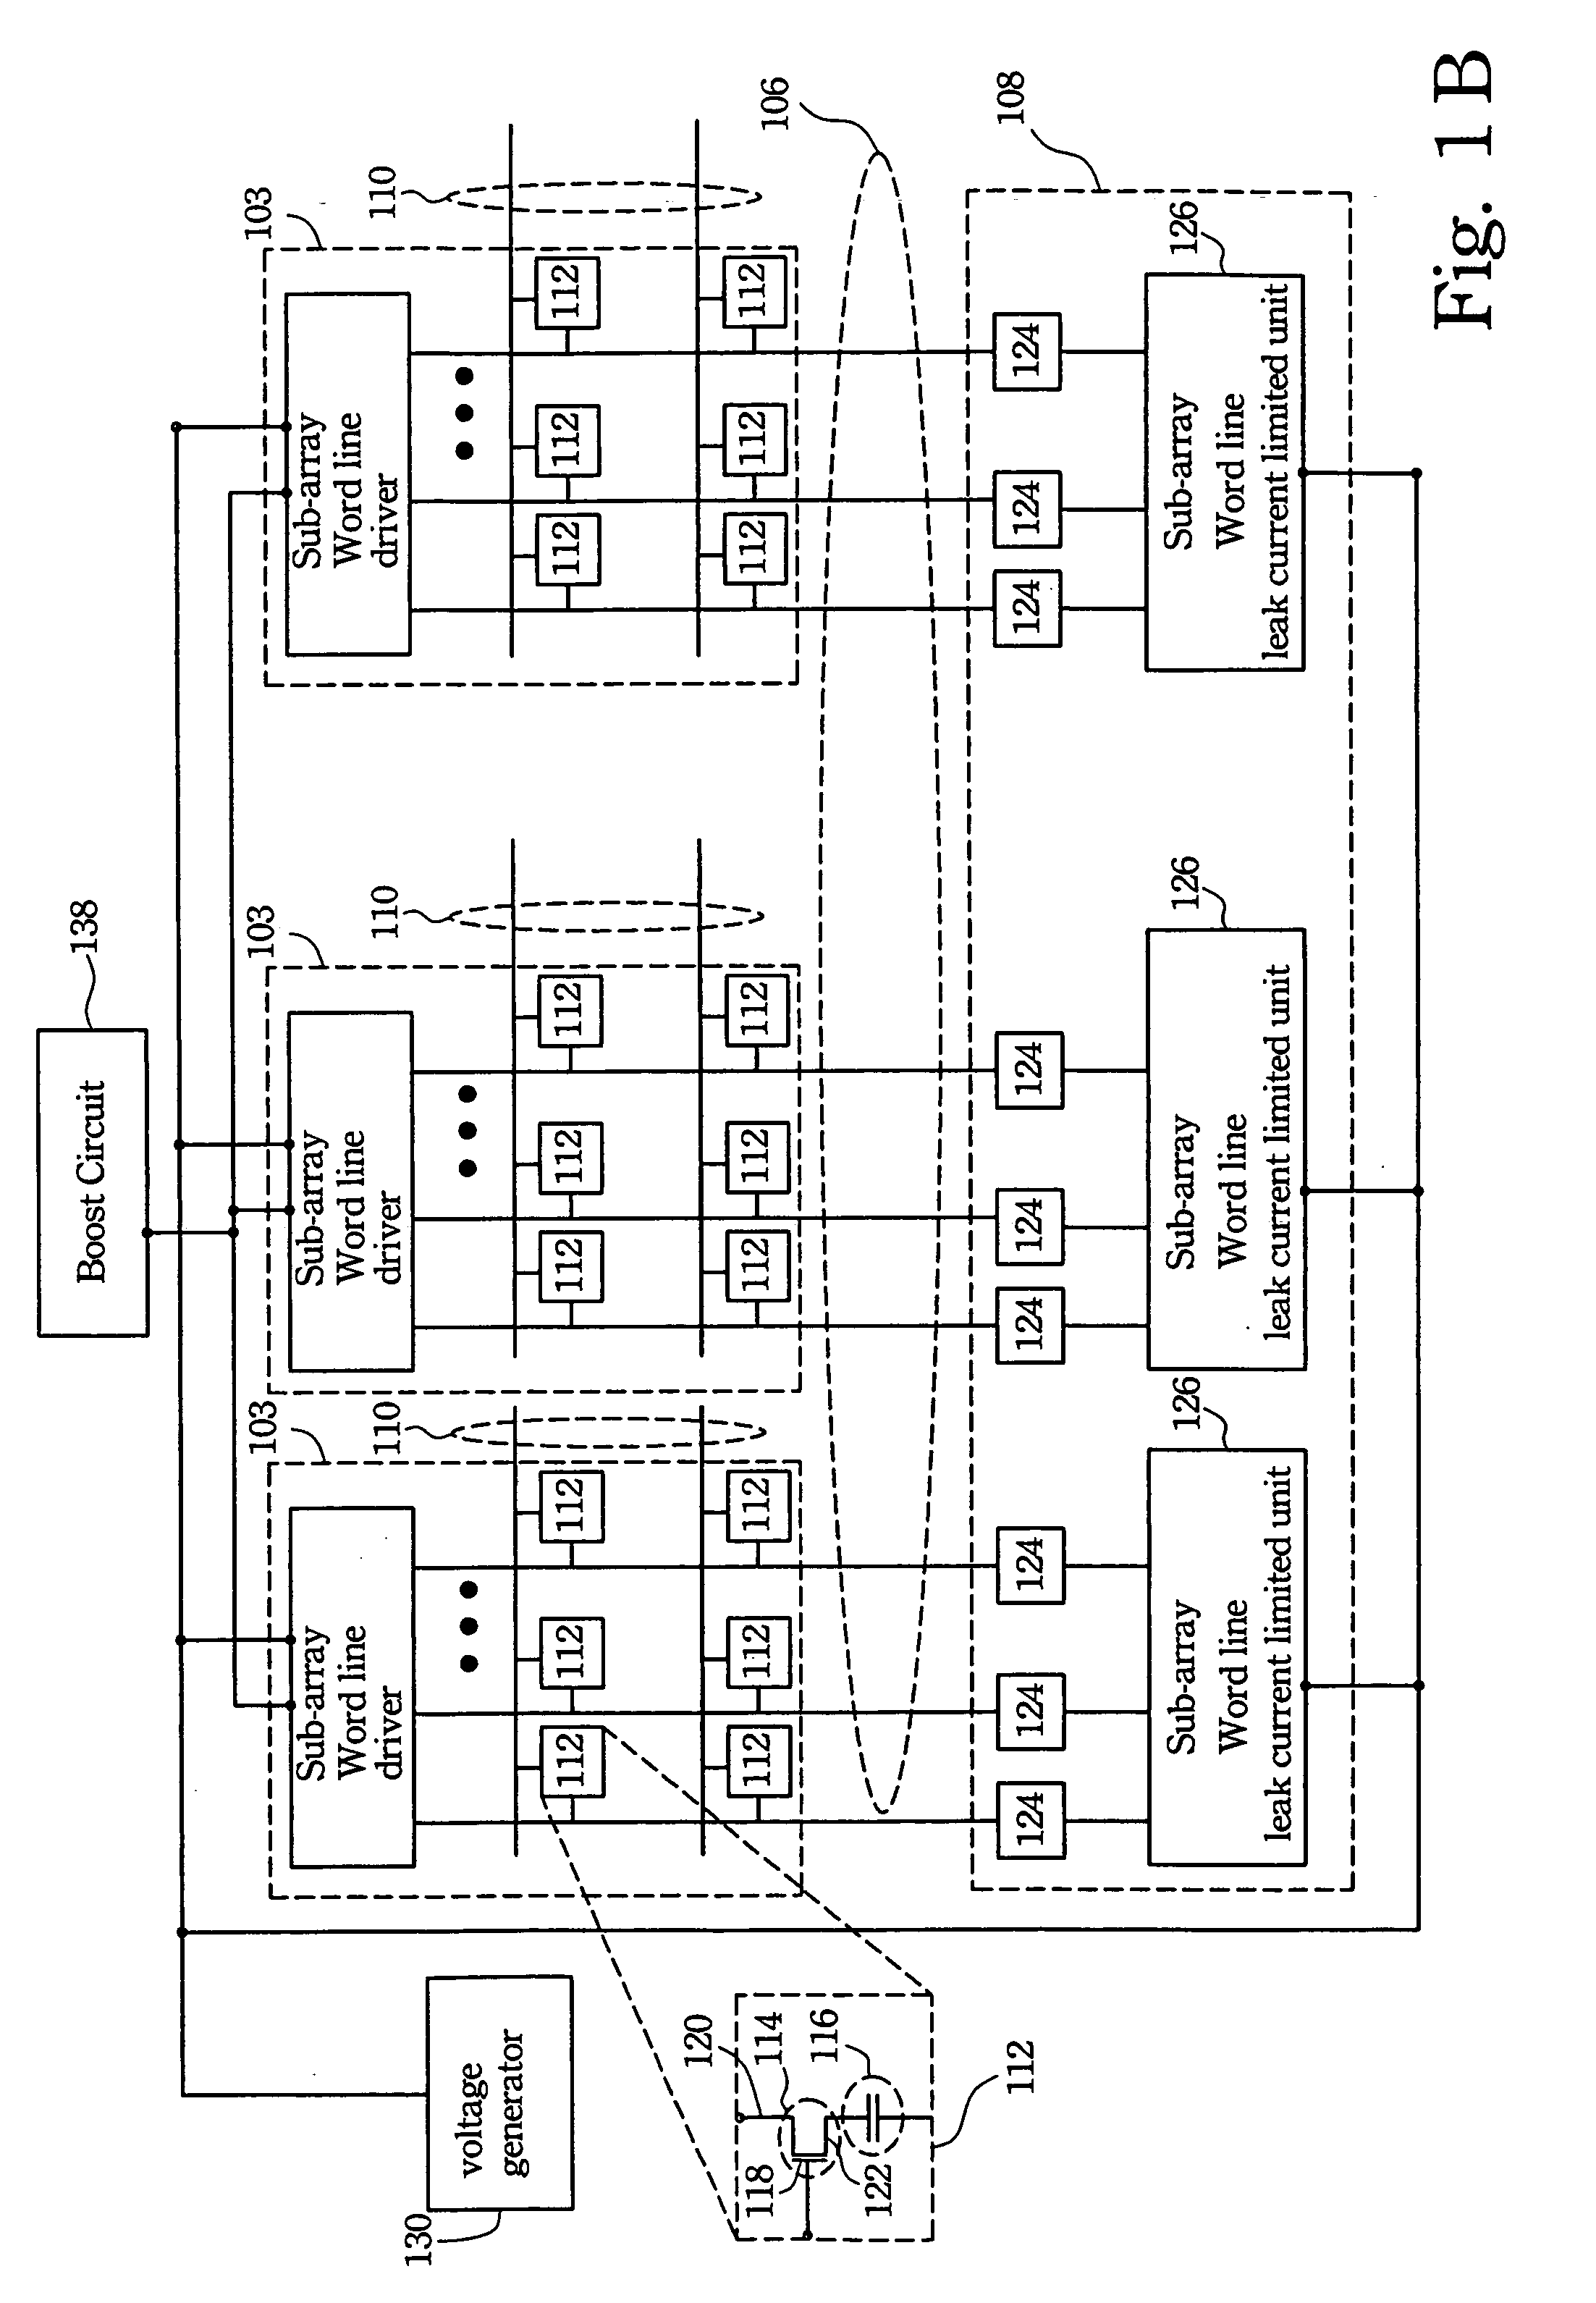 Memory device and method for burn-in test